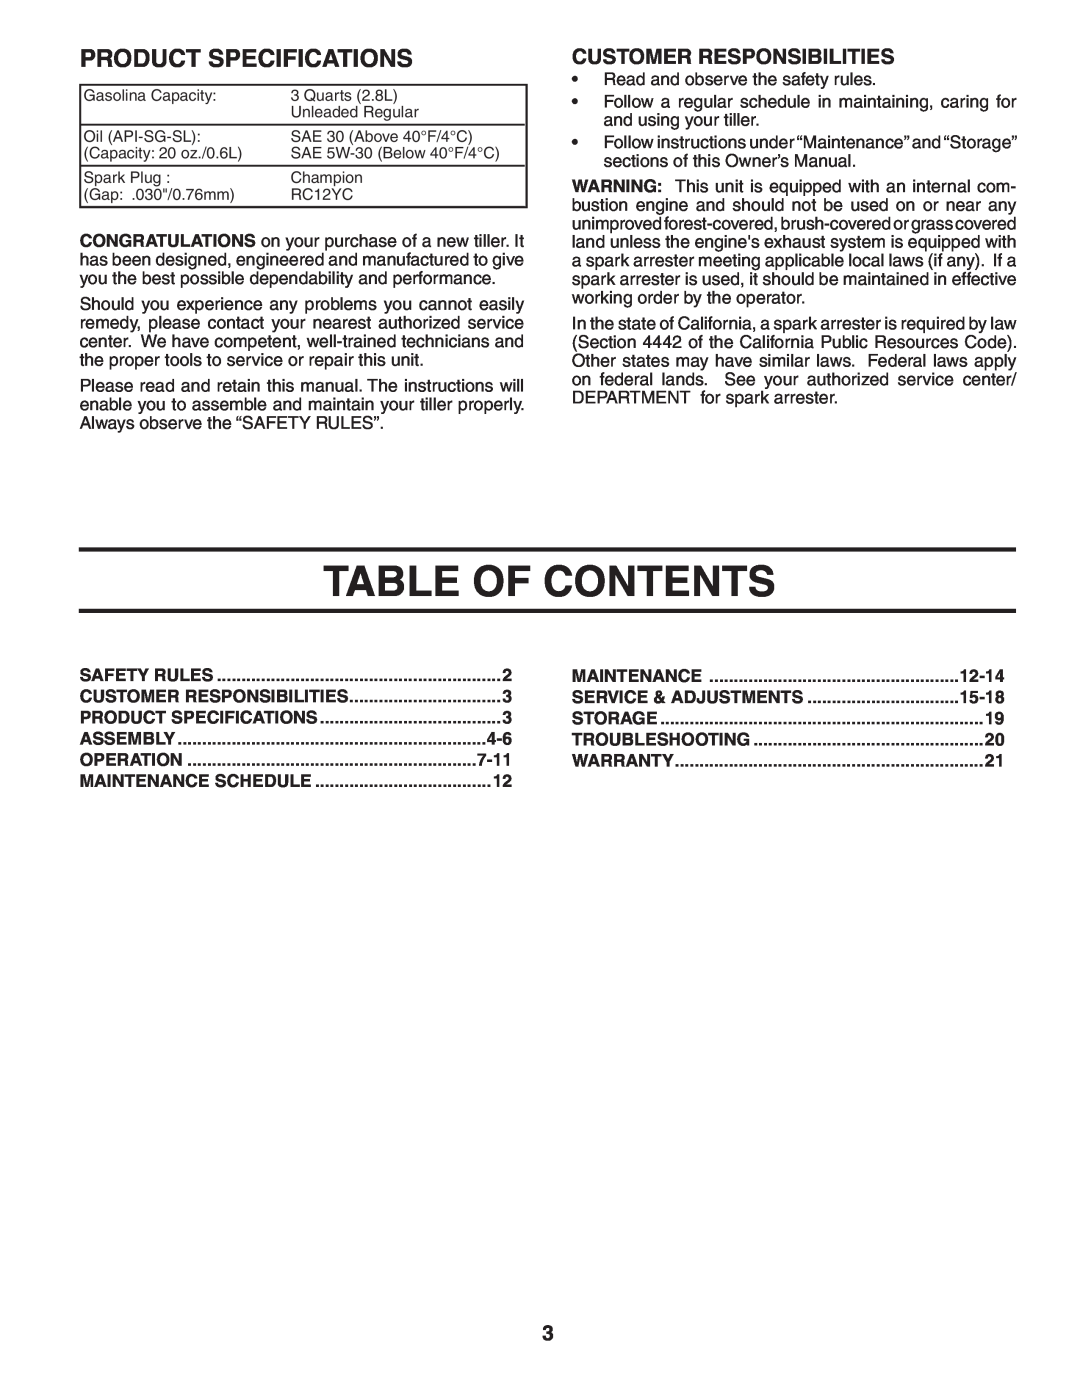 Poulan 96092000500, 401423 manual Table Of Contents, Product Specifications, Customer Responsibilities, 12-14, 15-18, 7-11 